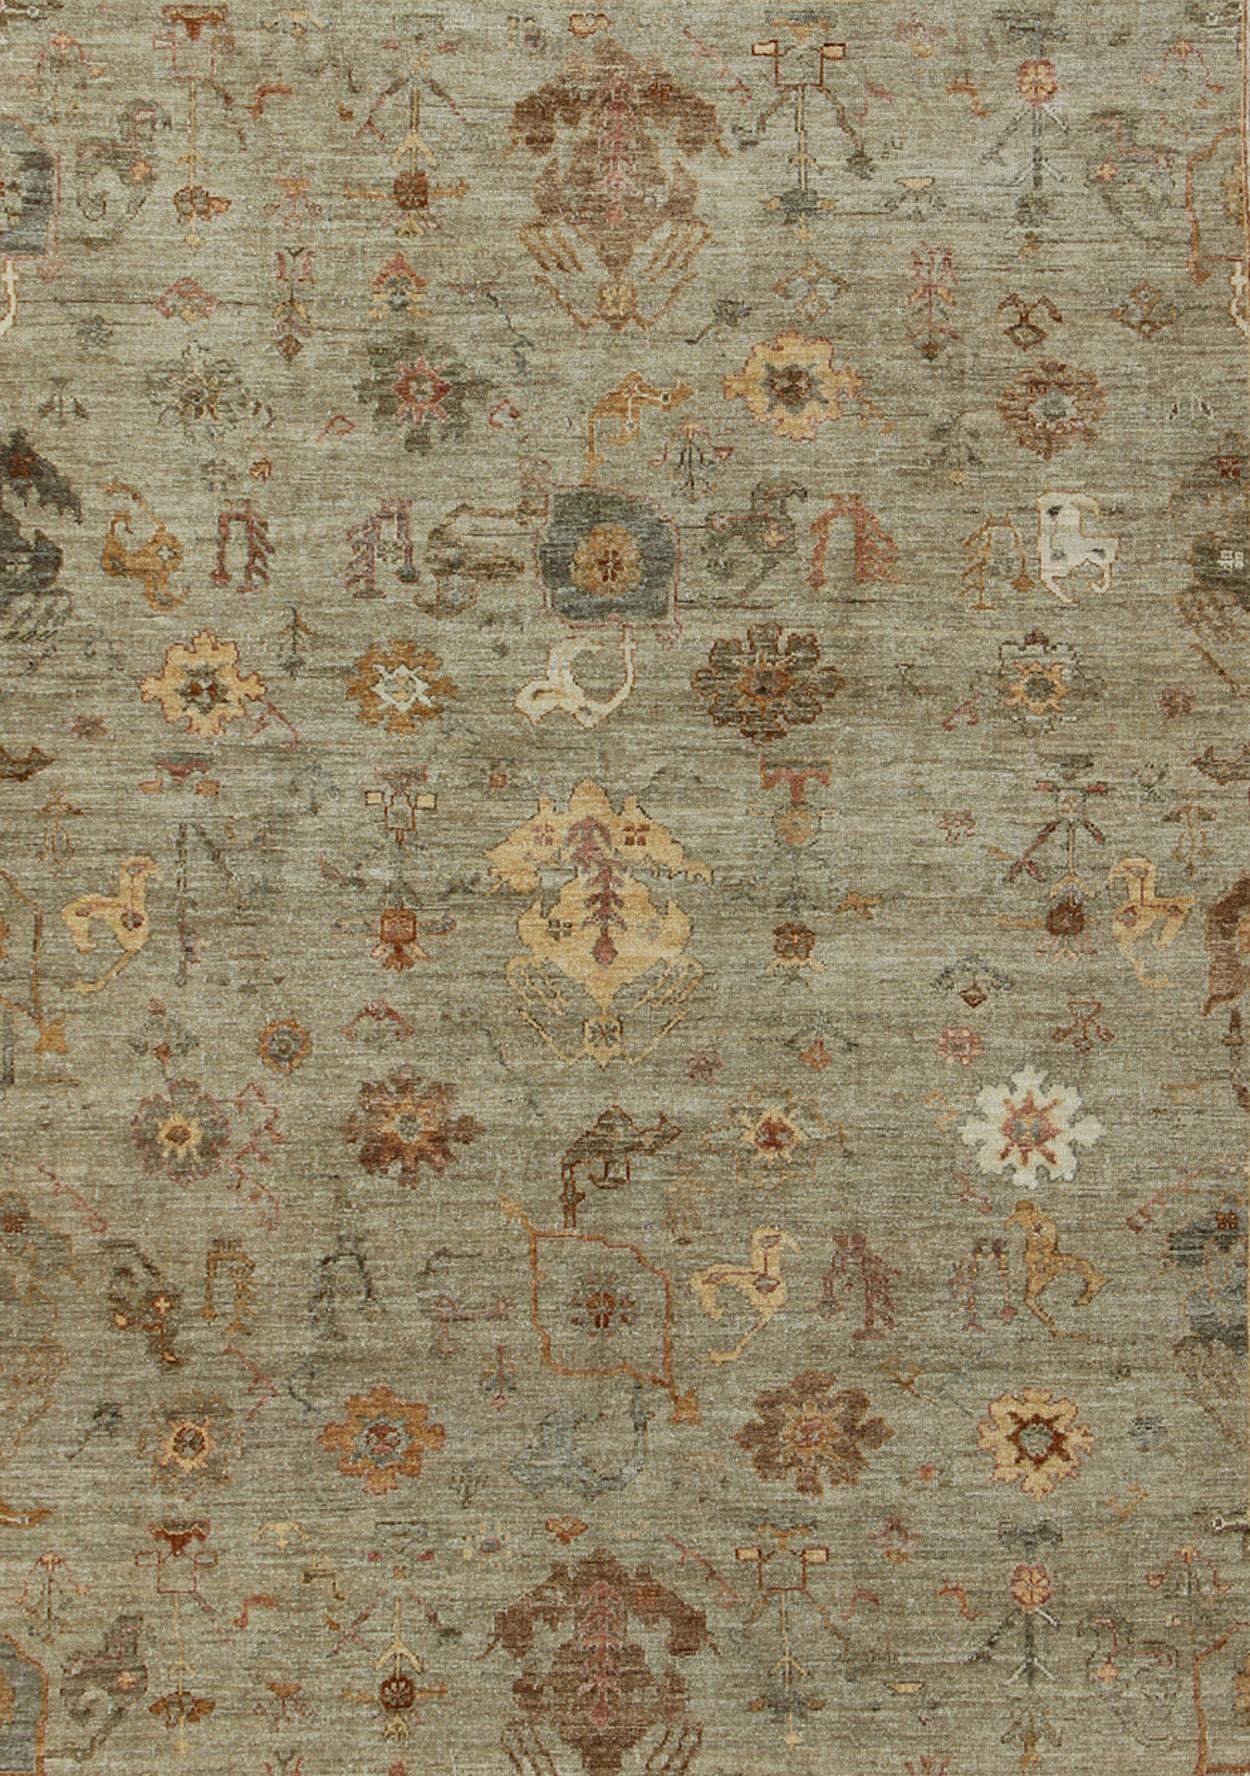 Contemporary Angora Oushak Turkish Rug in Warm Colors of Green, Steel Gray, Brown, Cream